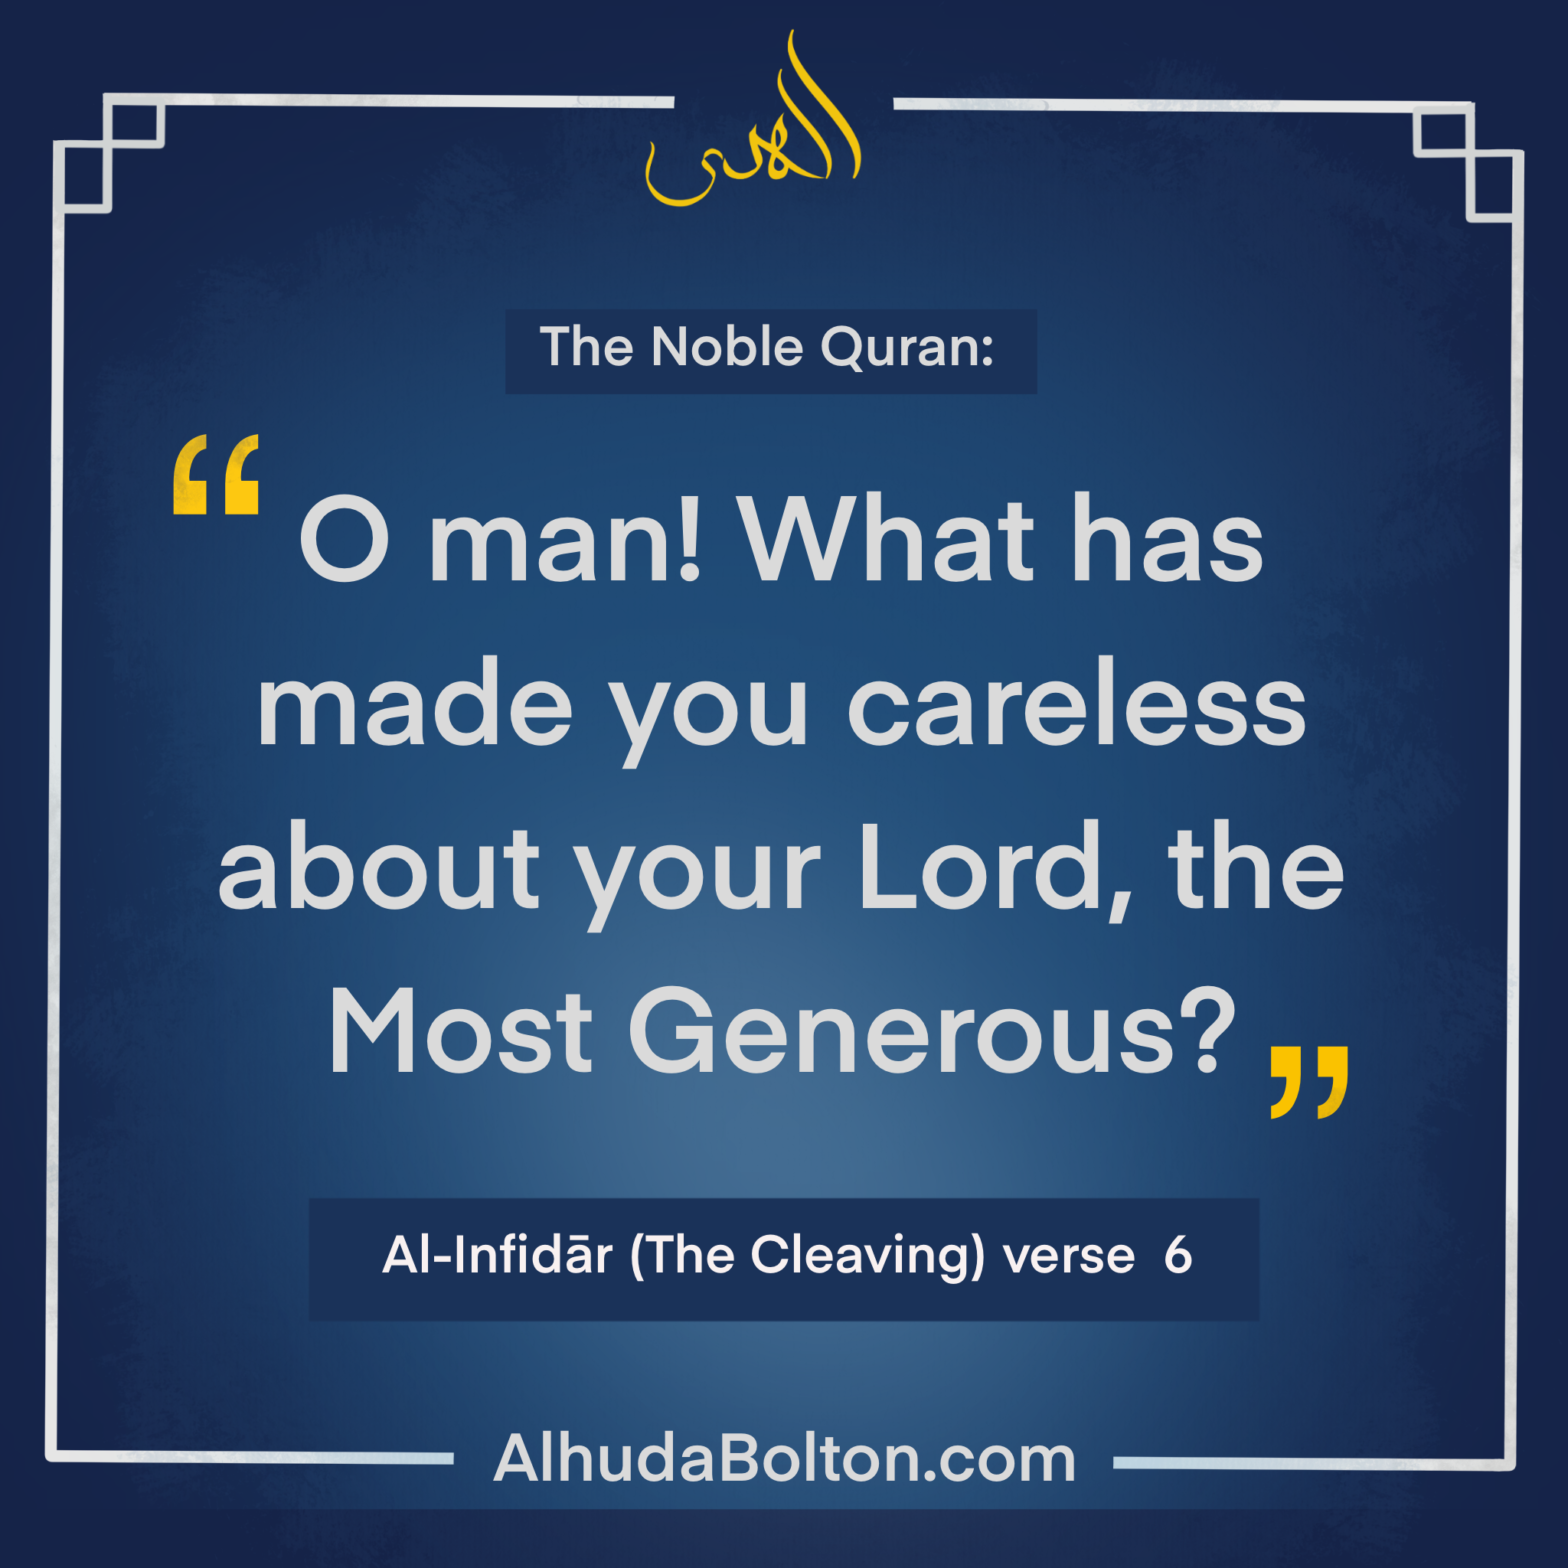 Qurān: “What has made you careless about your Lord…?”